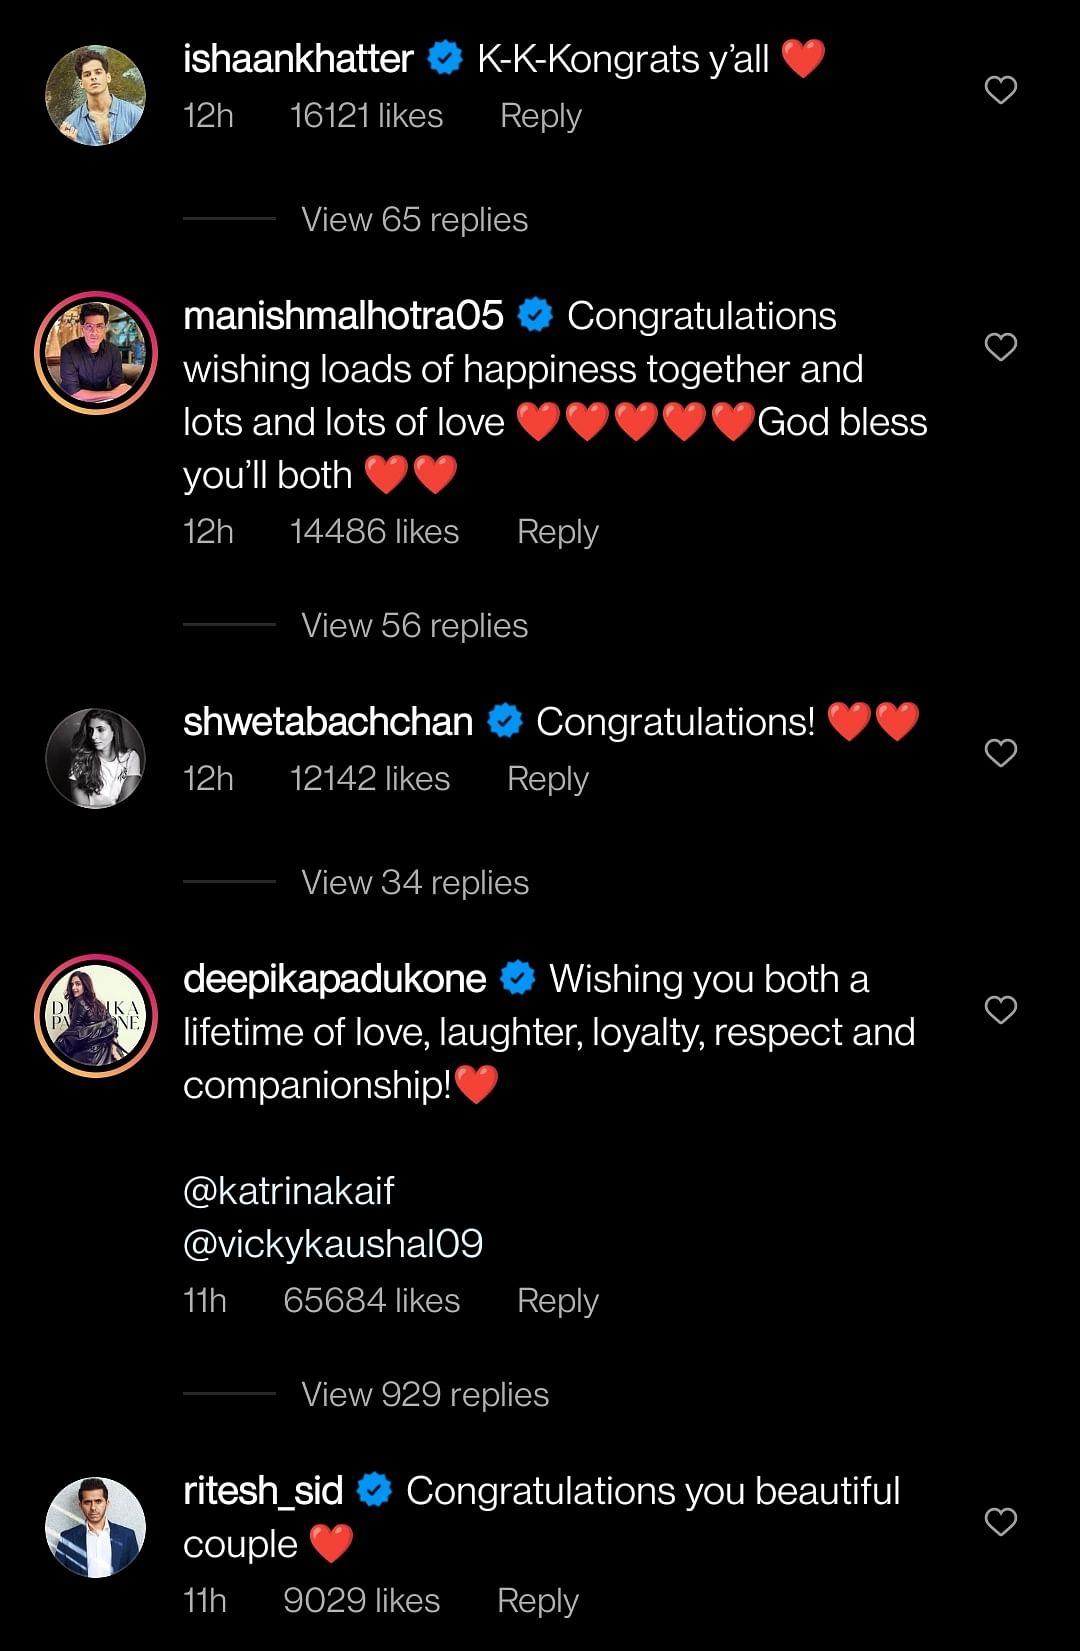 'Here’s raising a toast to the most gorgeous couple I know,' Neha Dhupia wished Katrina and Vicky.